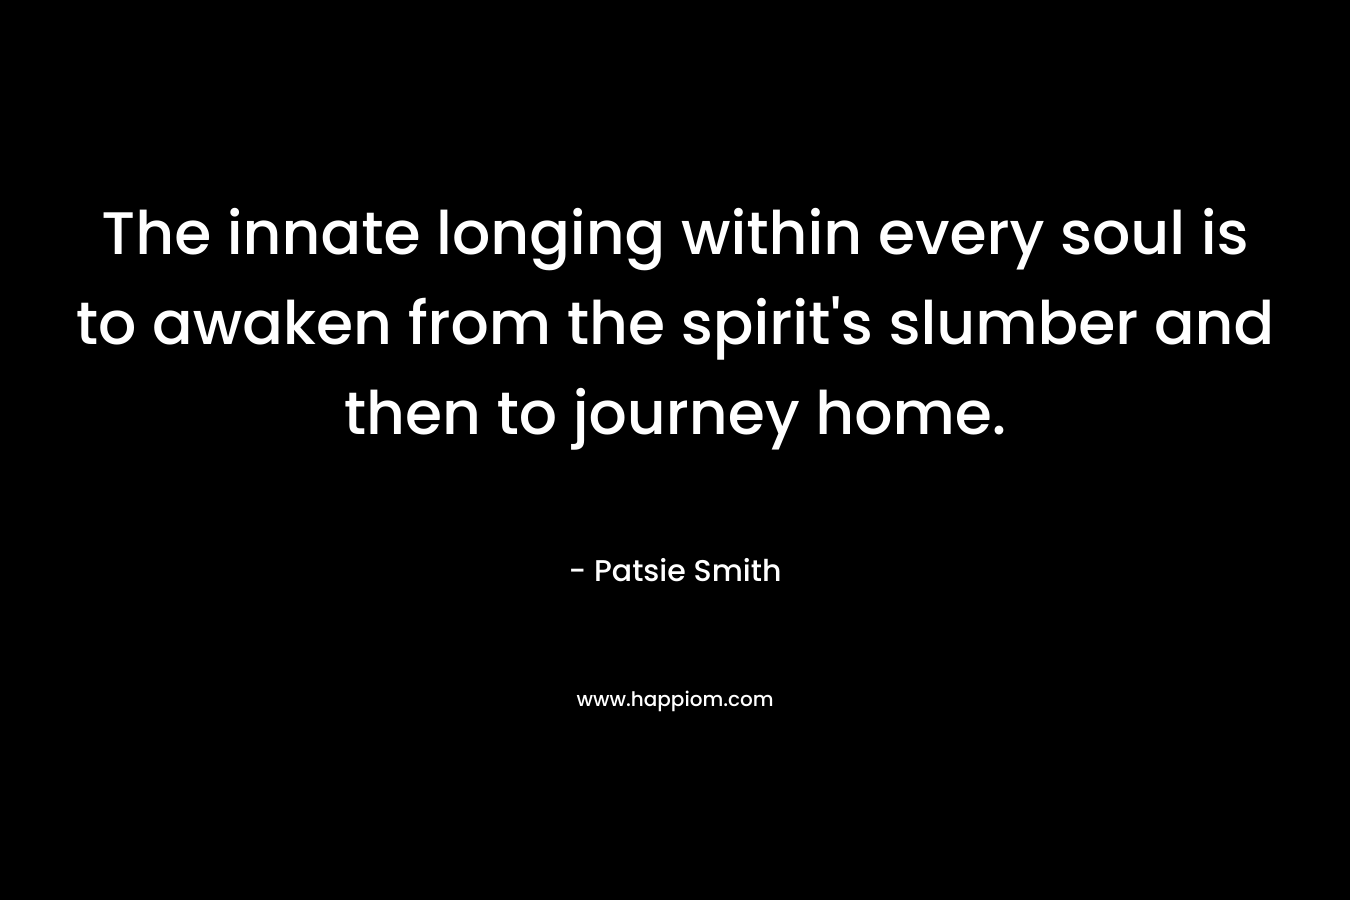 The innate longing within every soul is to awaken from the spirit’s slumber and then to journey home. – Patsie Smith